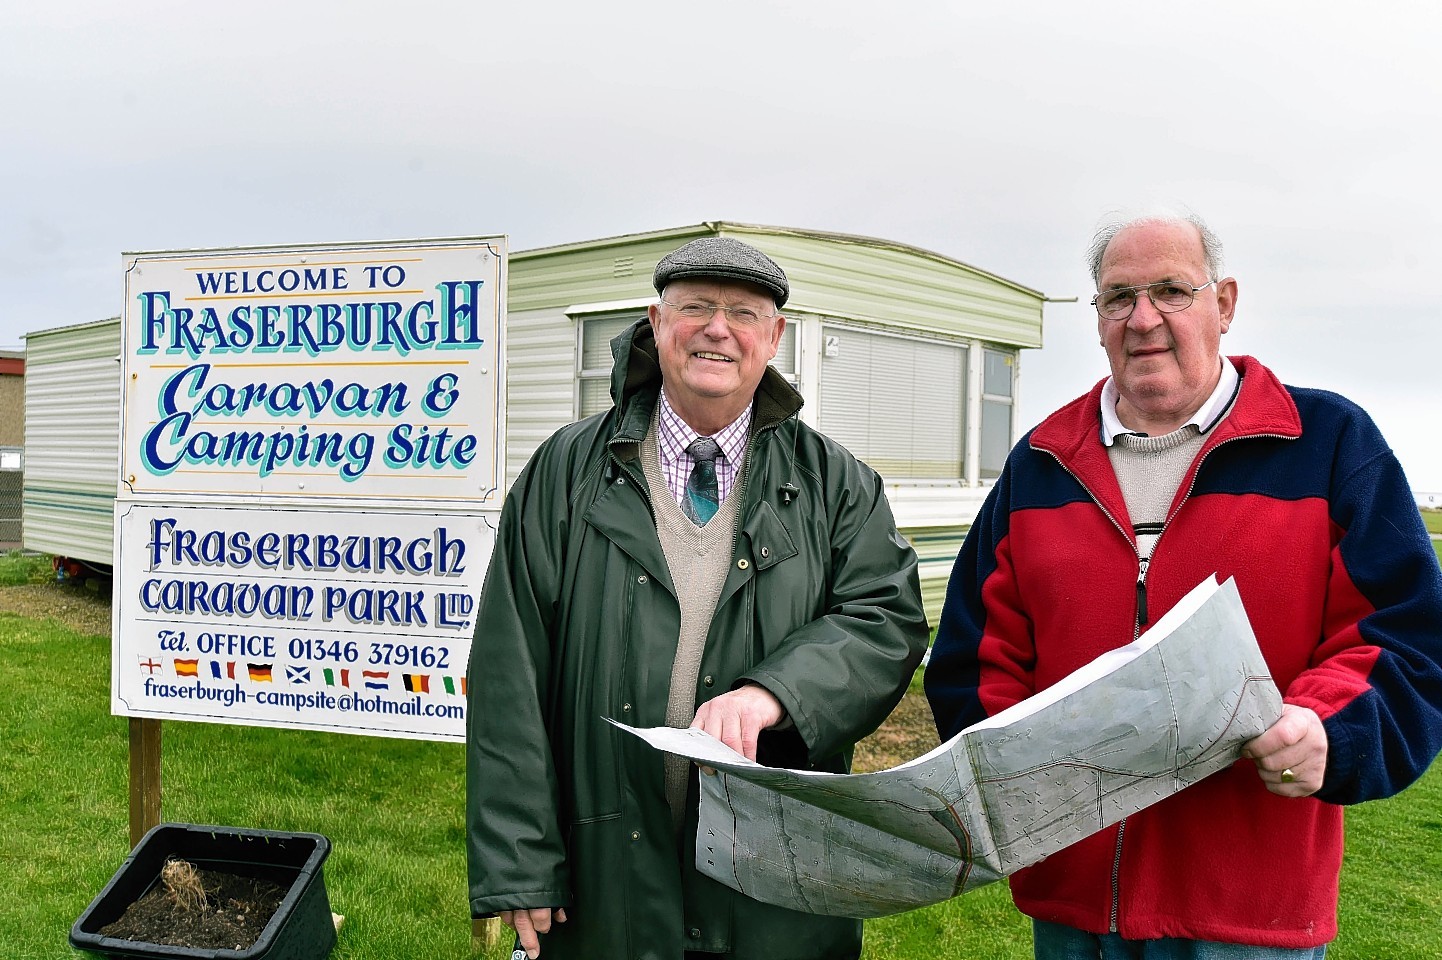 Fraserburgh Caravan Park could be an "exceptional" asset to the community